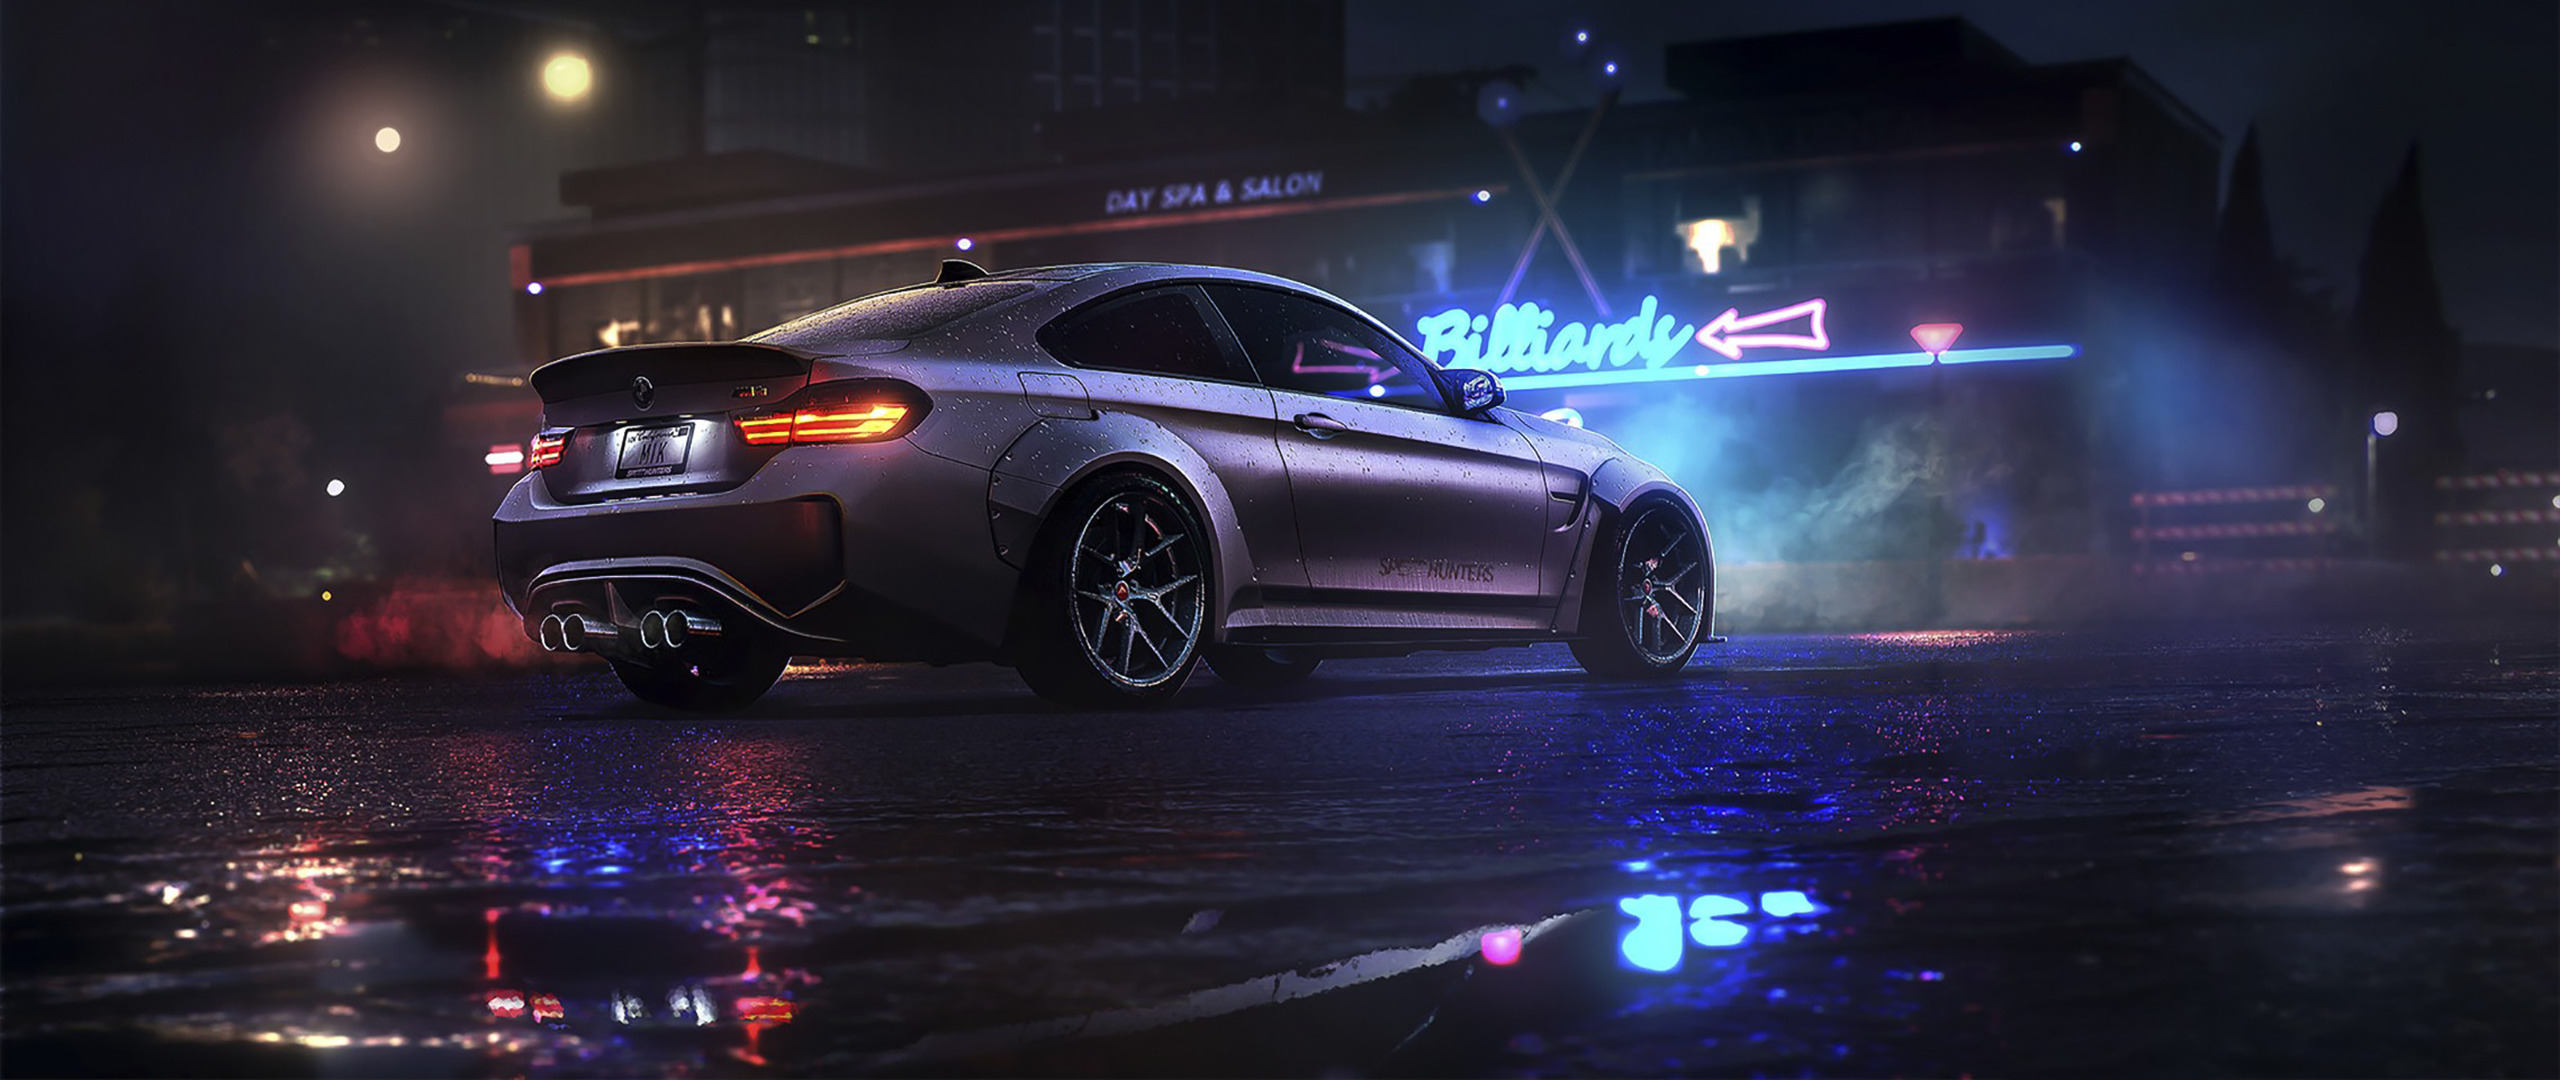 ultra wide, Car, BMW, Need for Speed Wallpapers HD / Desktop and Mobile